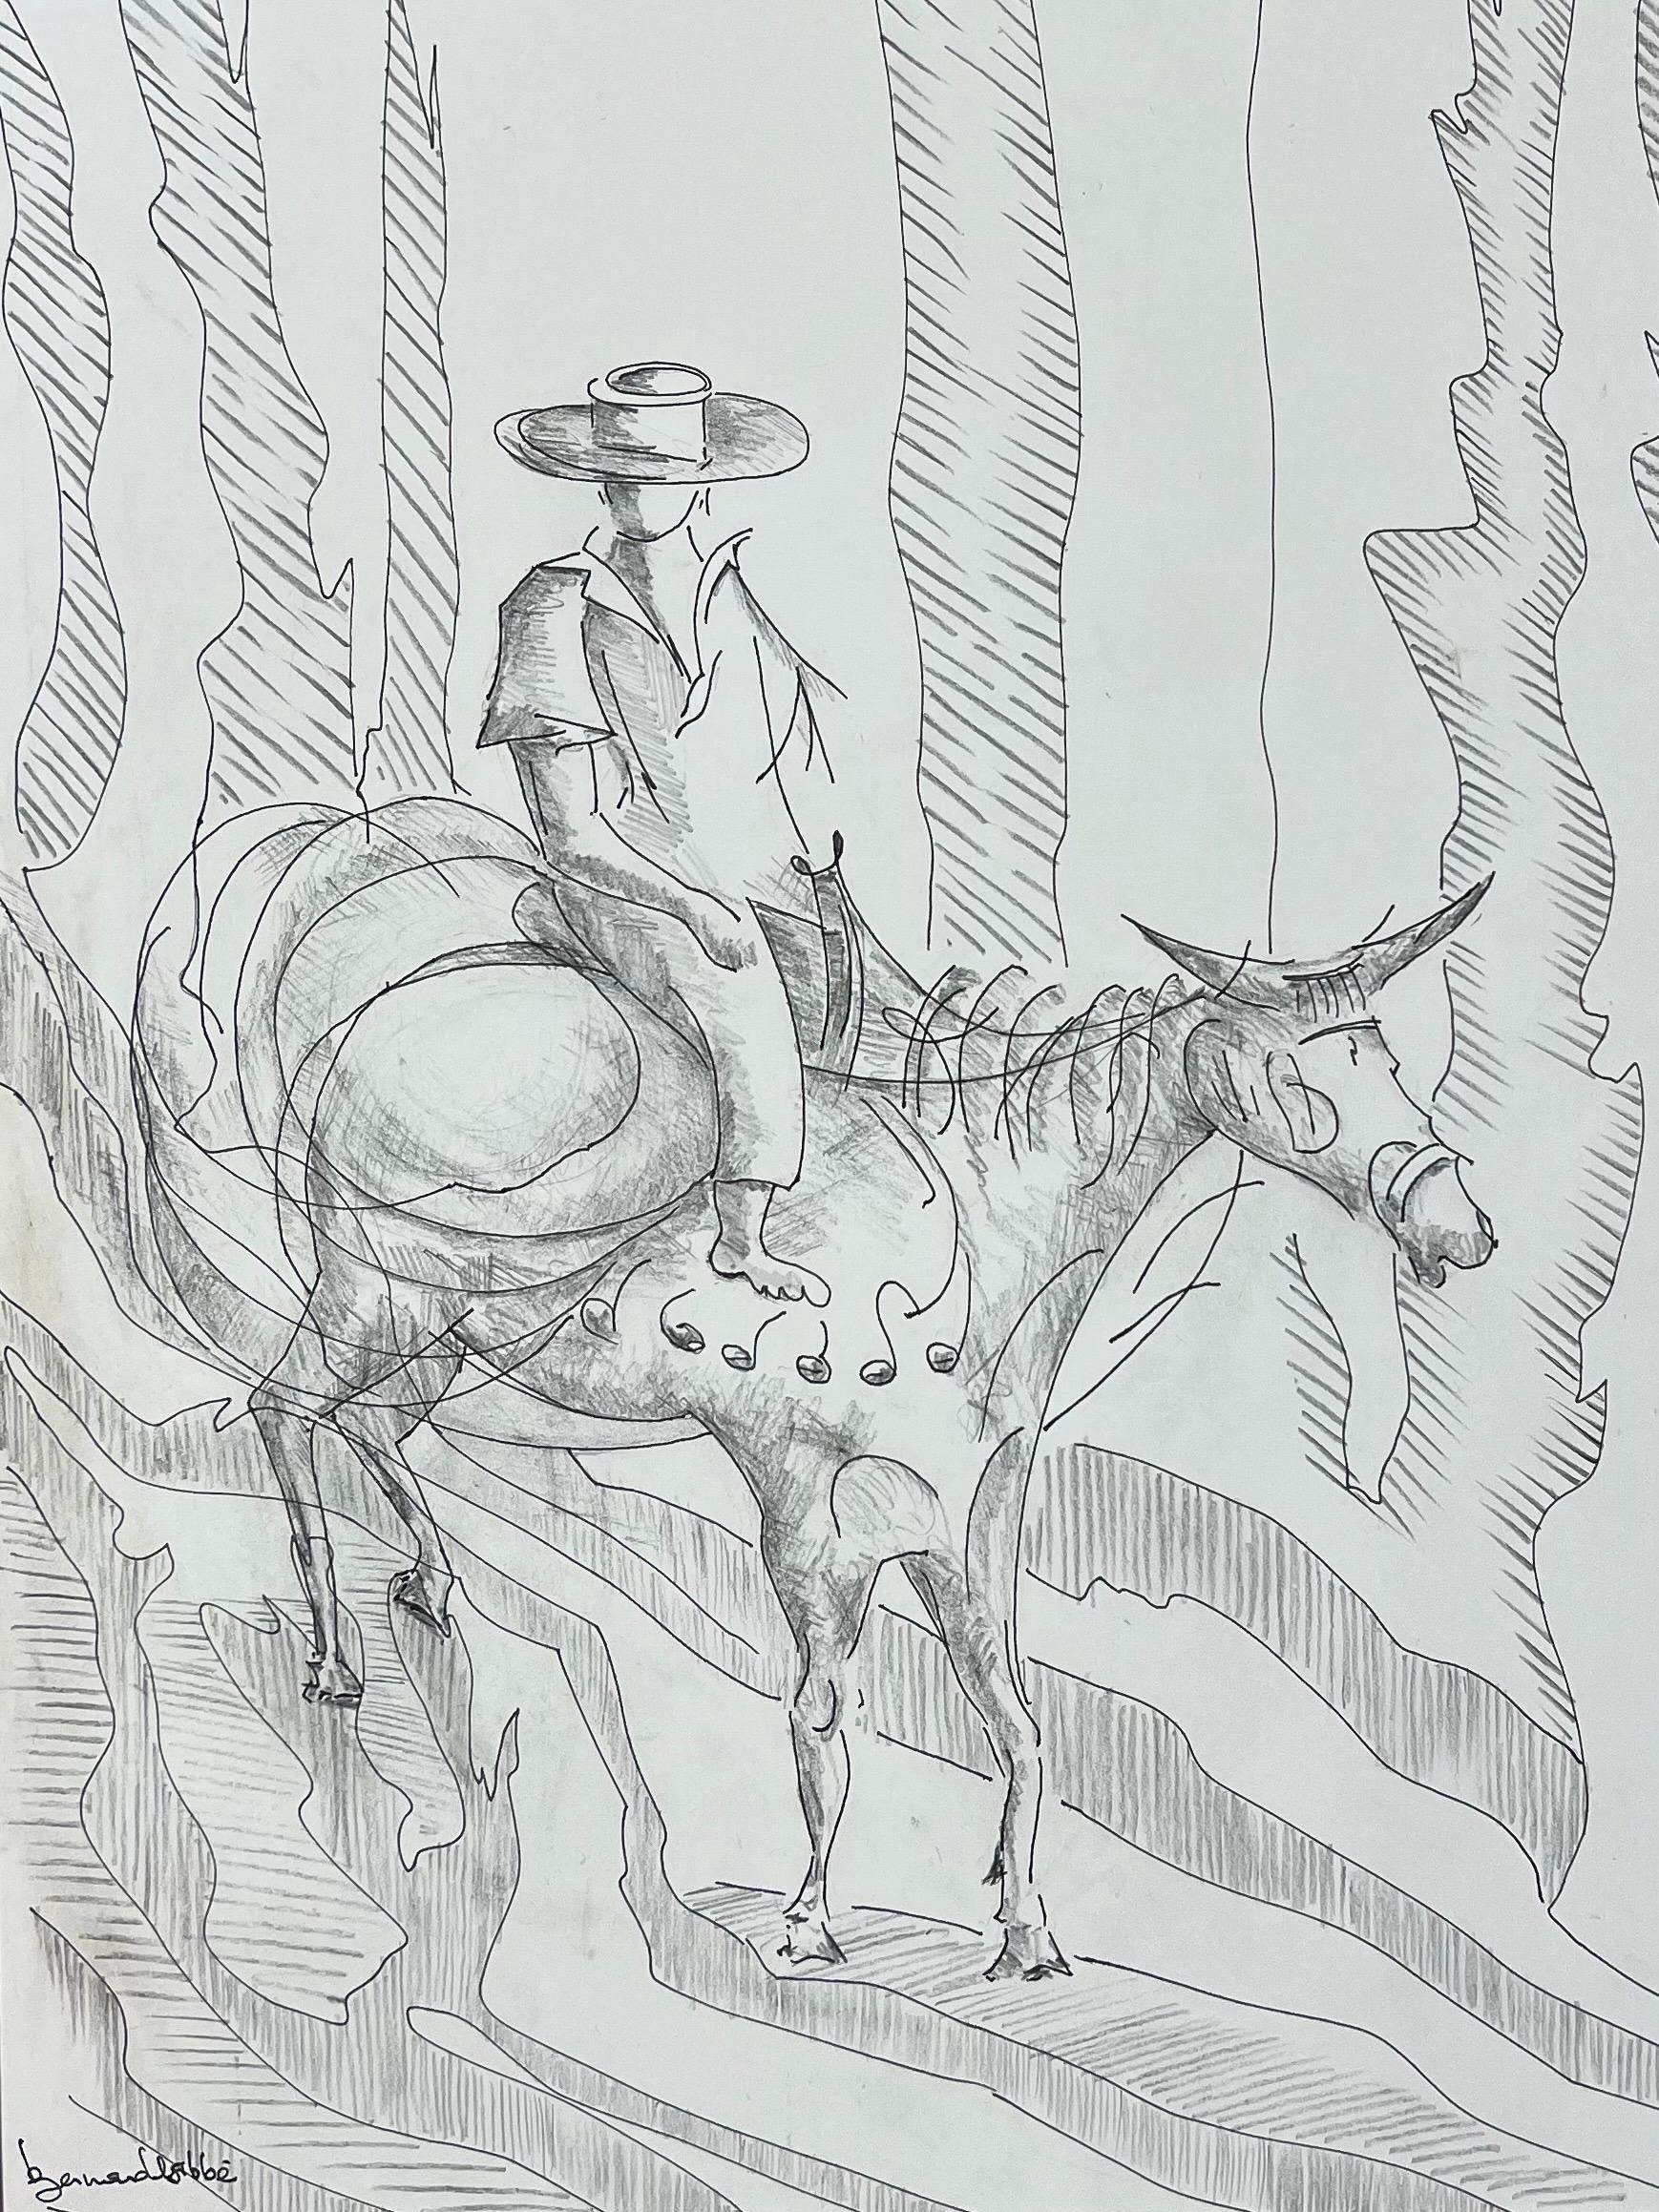 1950's Modernist/ Cubist Painting - Horse and Cowboy Illustration - Art by Bernard Labbe